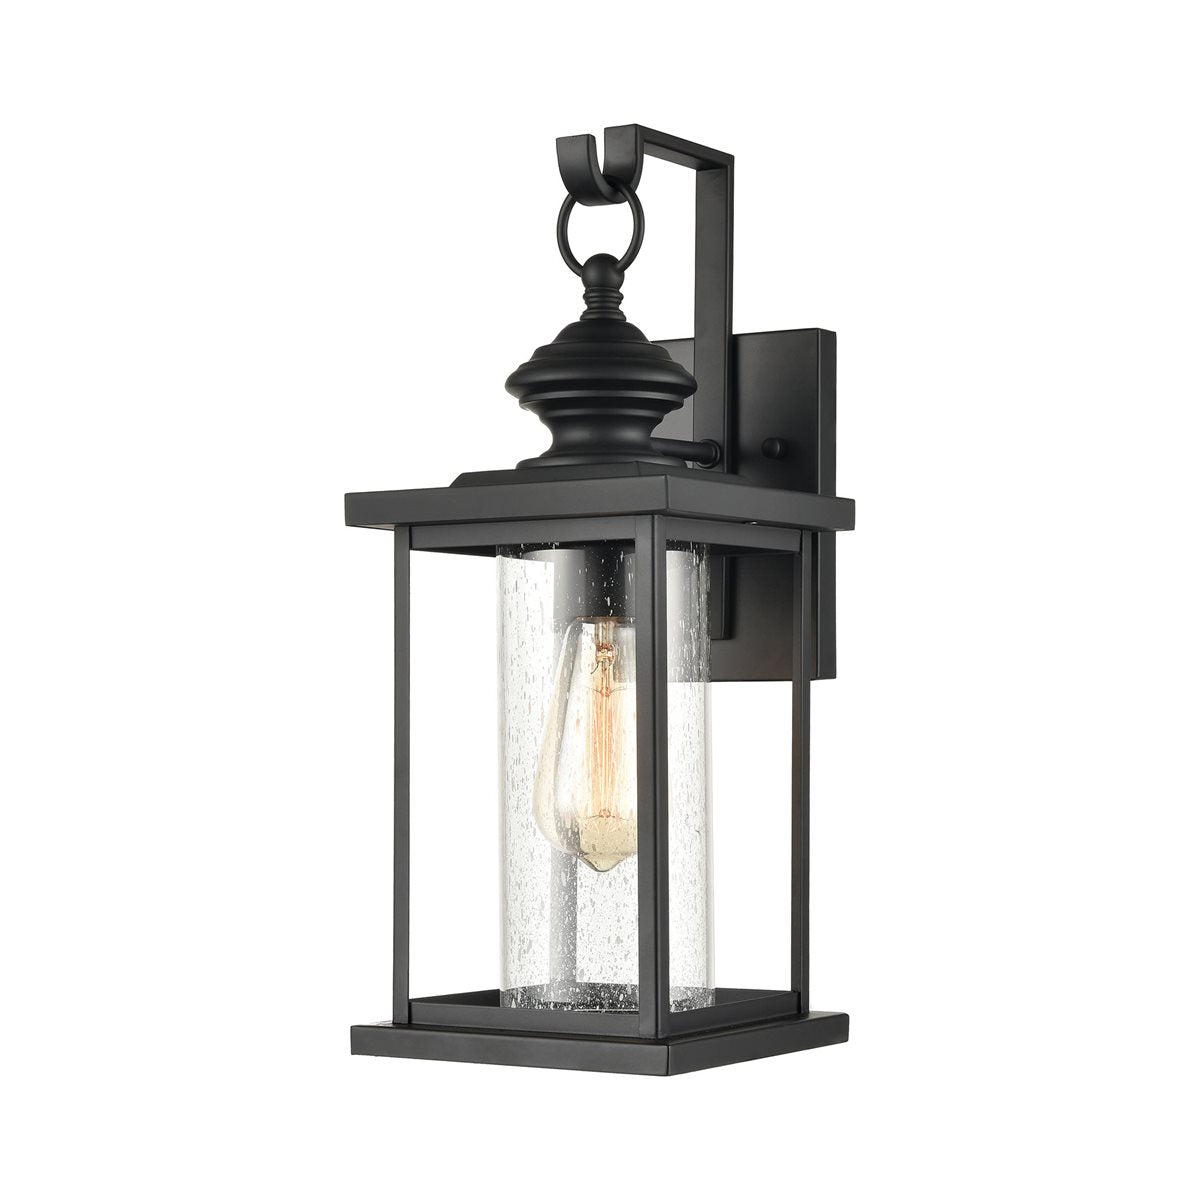 Minersville 1-Light Outdoor Wall Lamps in Matte Black with Antique Speckled Glass by ELK Lighting-2